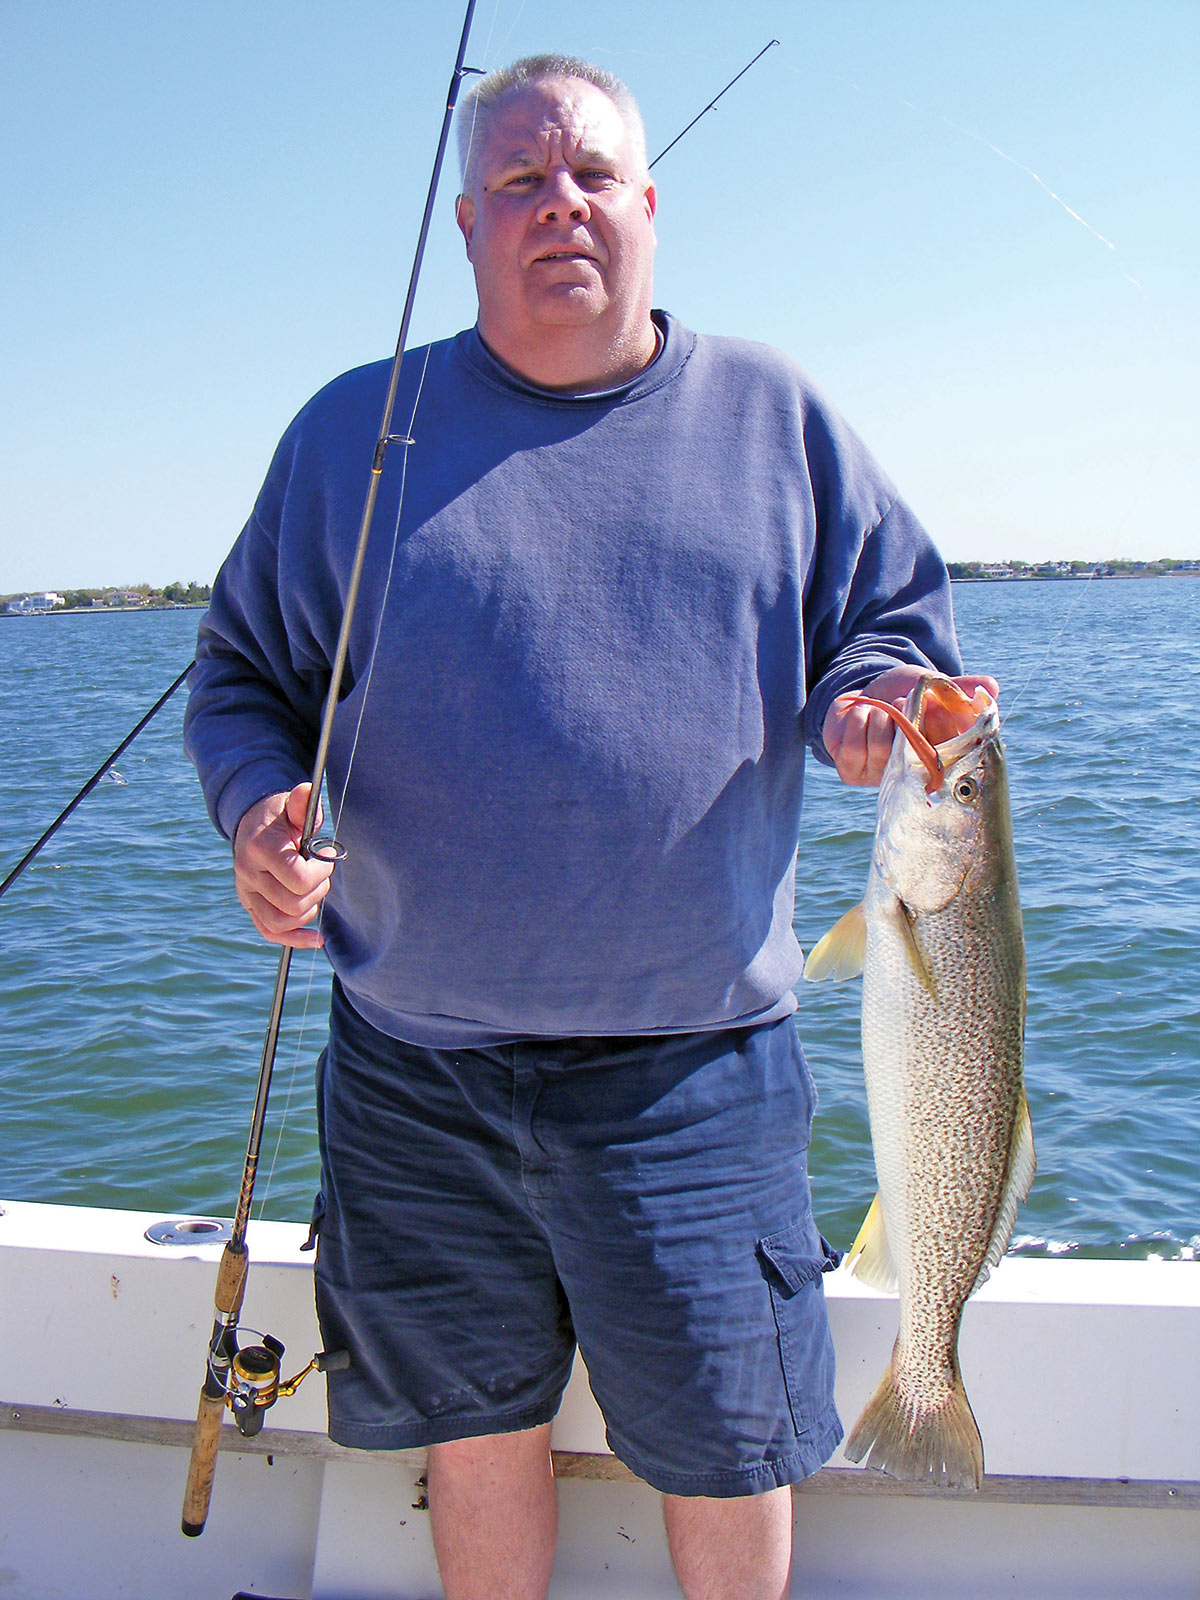 Man on a boat holding the fish he caught and a fishing rod